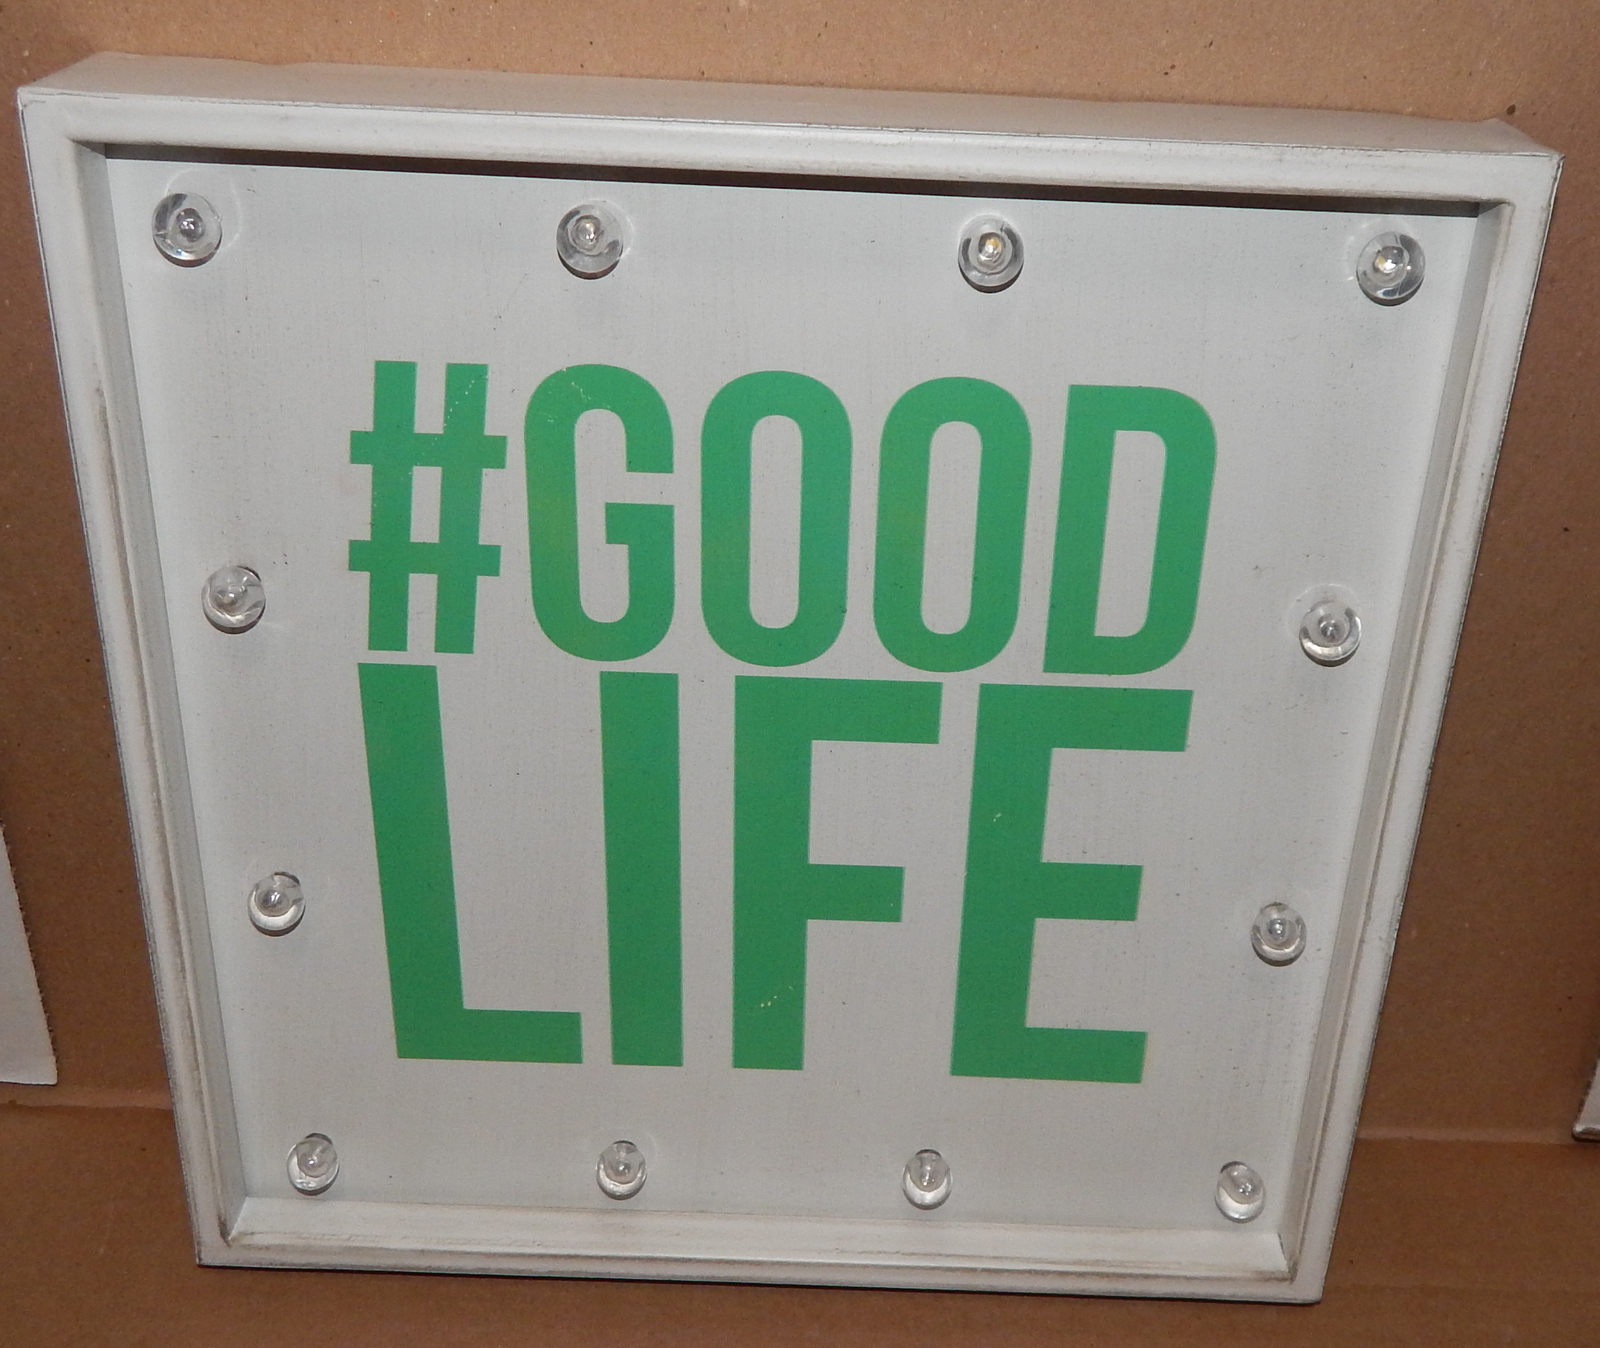 Primary image for Metal LED Sign # Good Life Switch Operate 12ea Lights 13" x 13" Batteries 78O